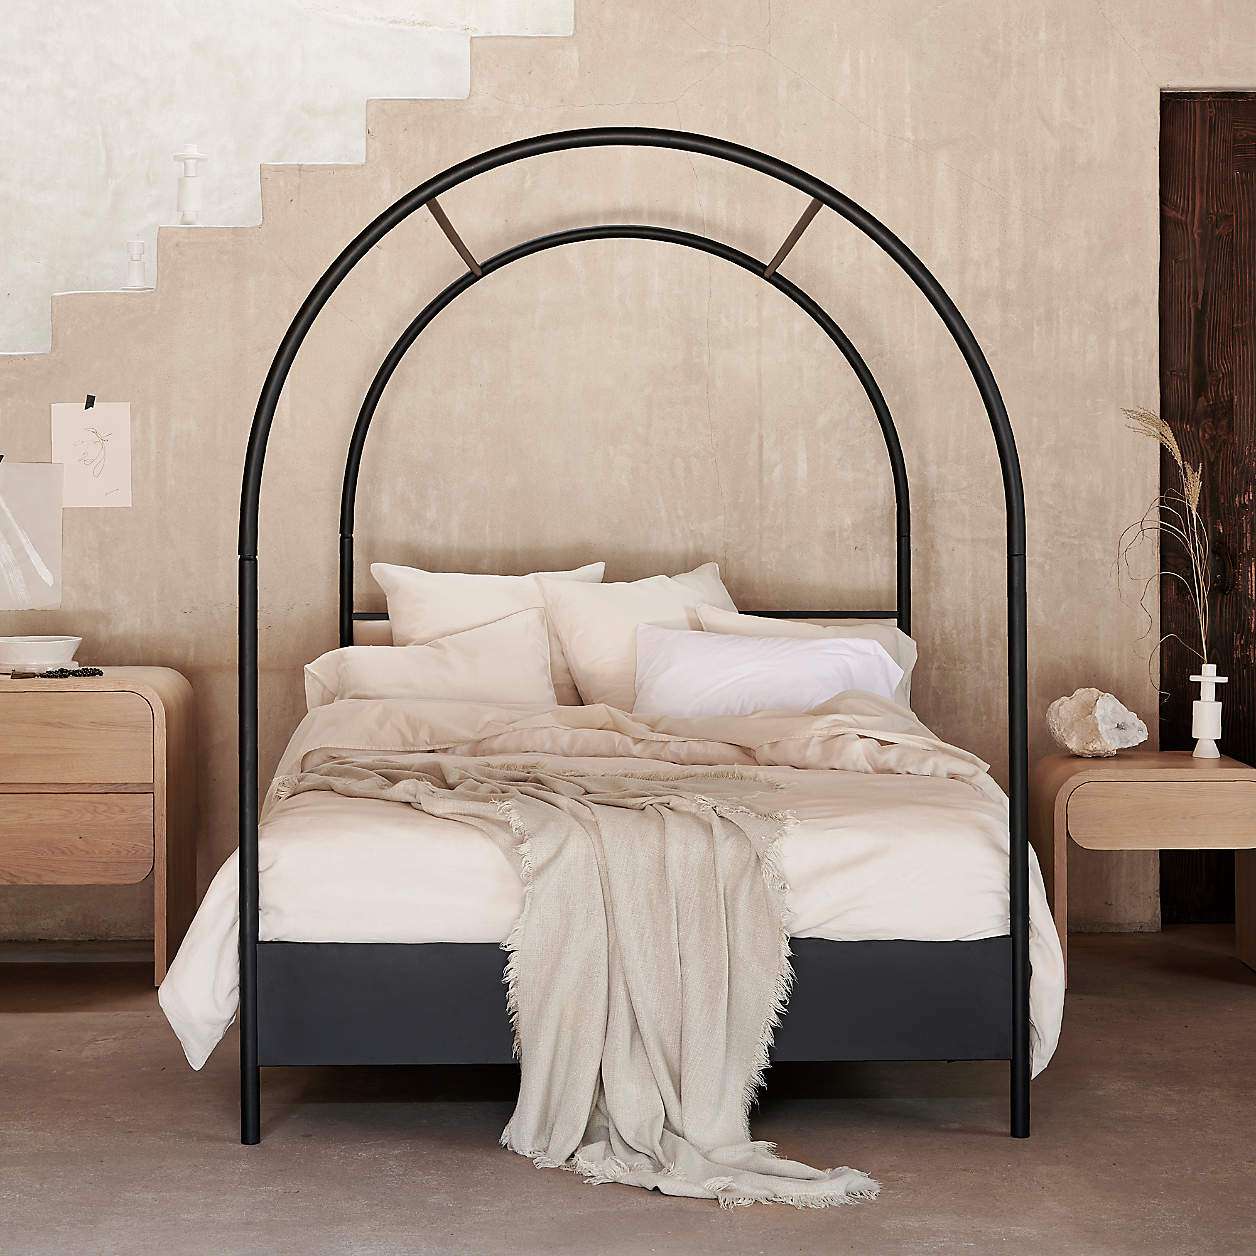 Leanne Ford Arched Canopy Bed Frame